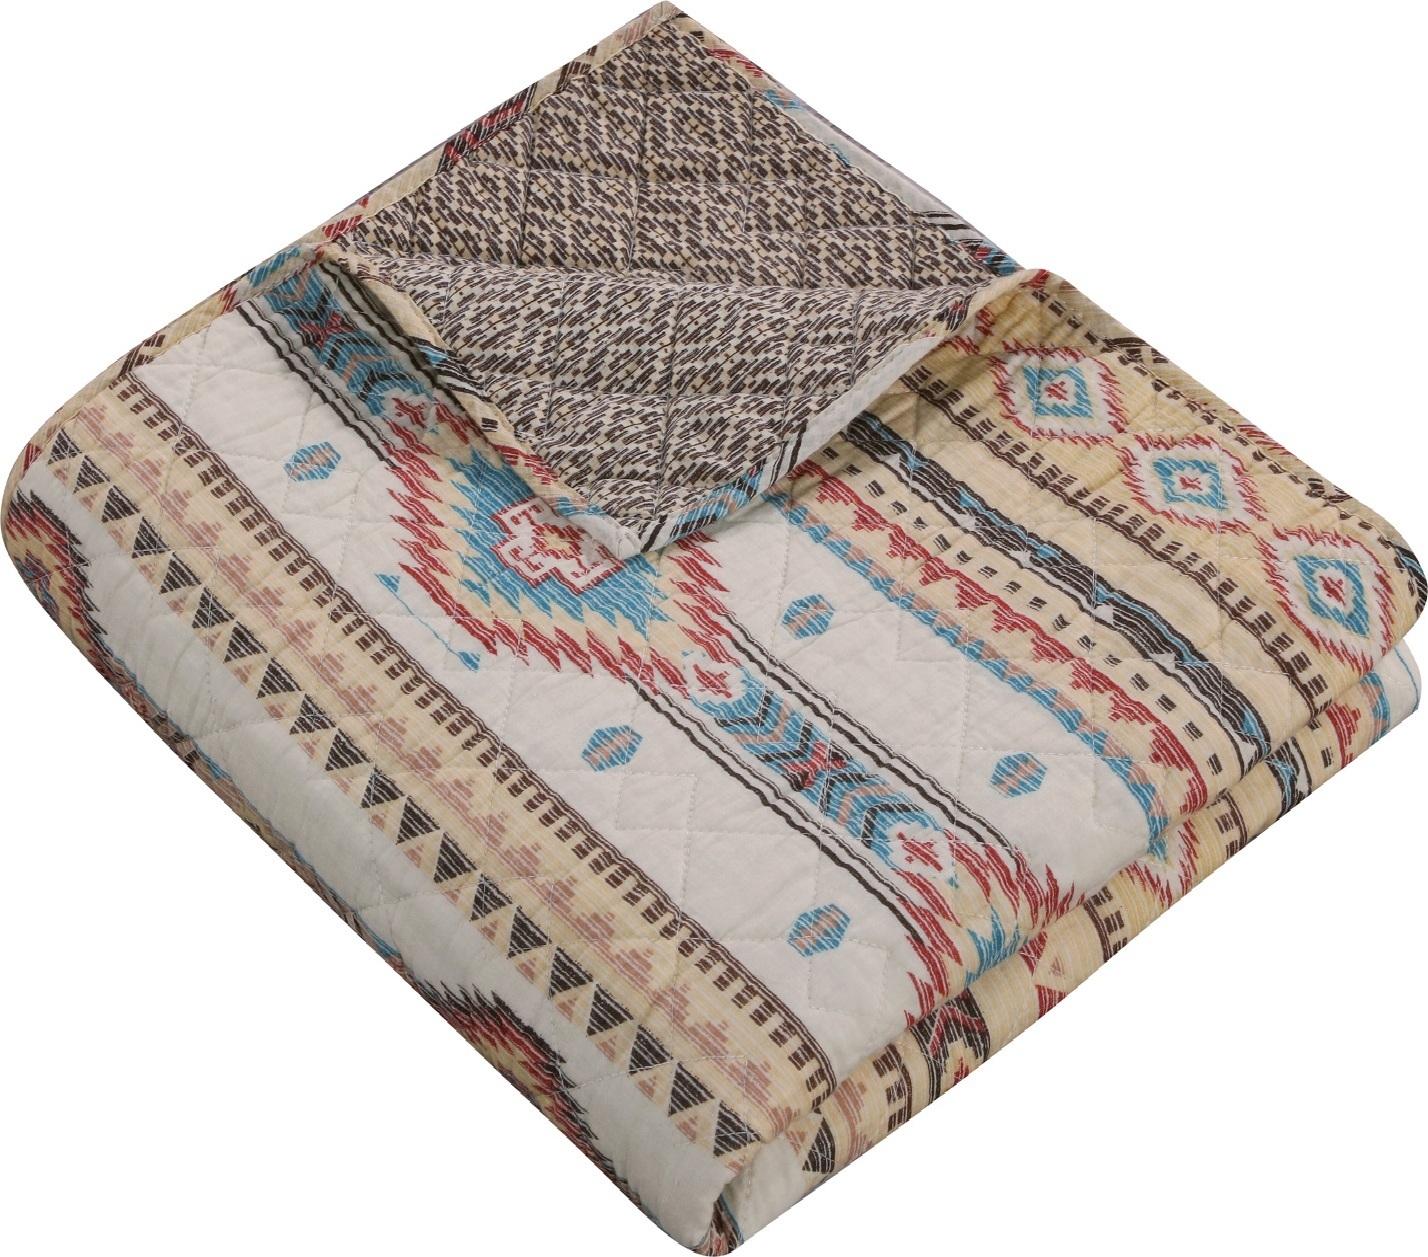 plush quilted blanket Greenland Home Fashions Accessory Tan